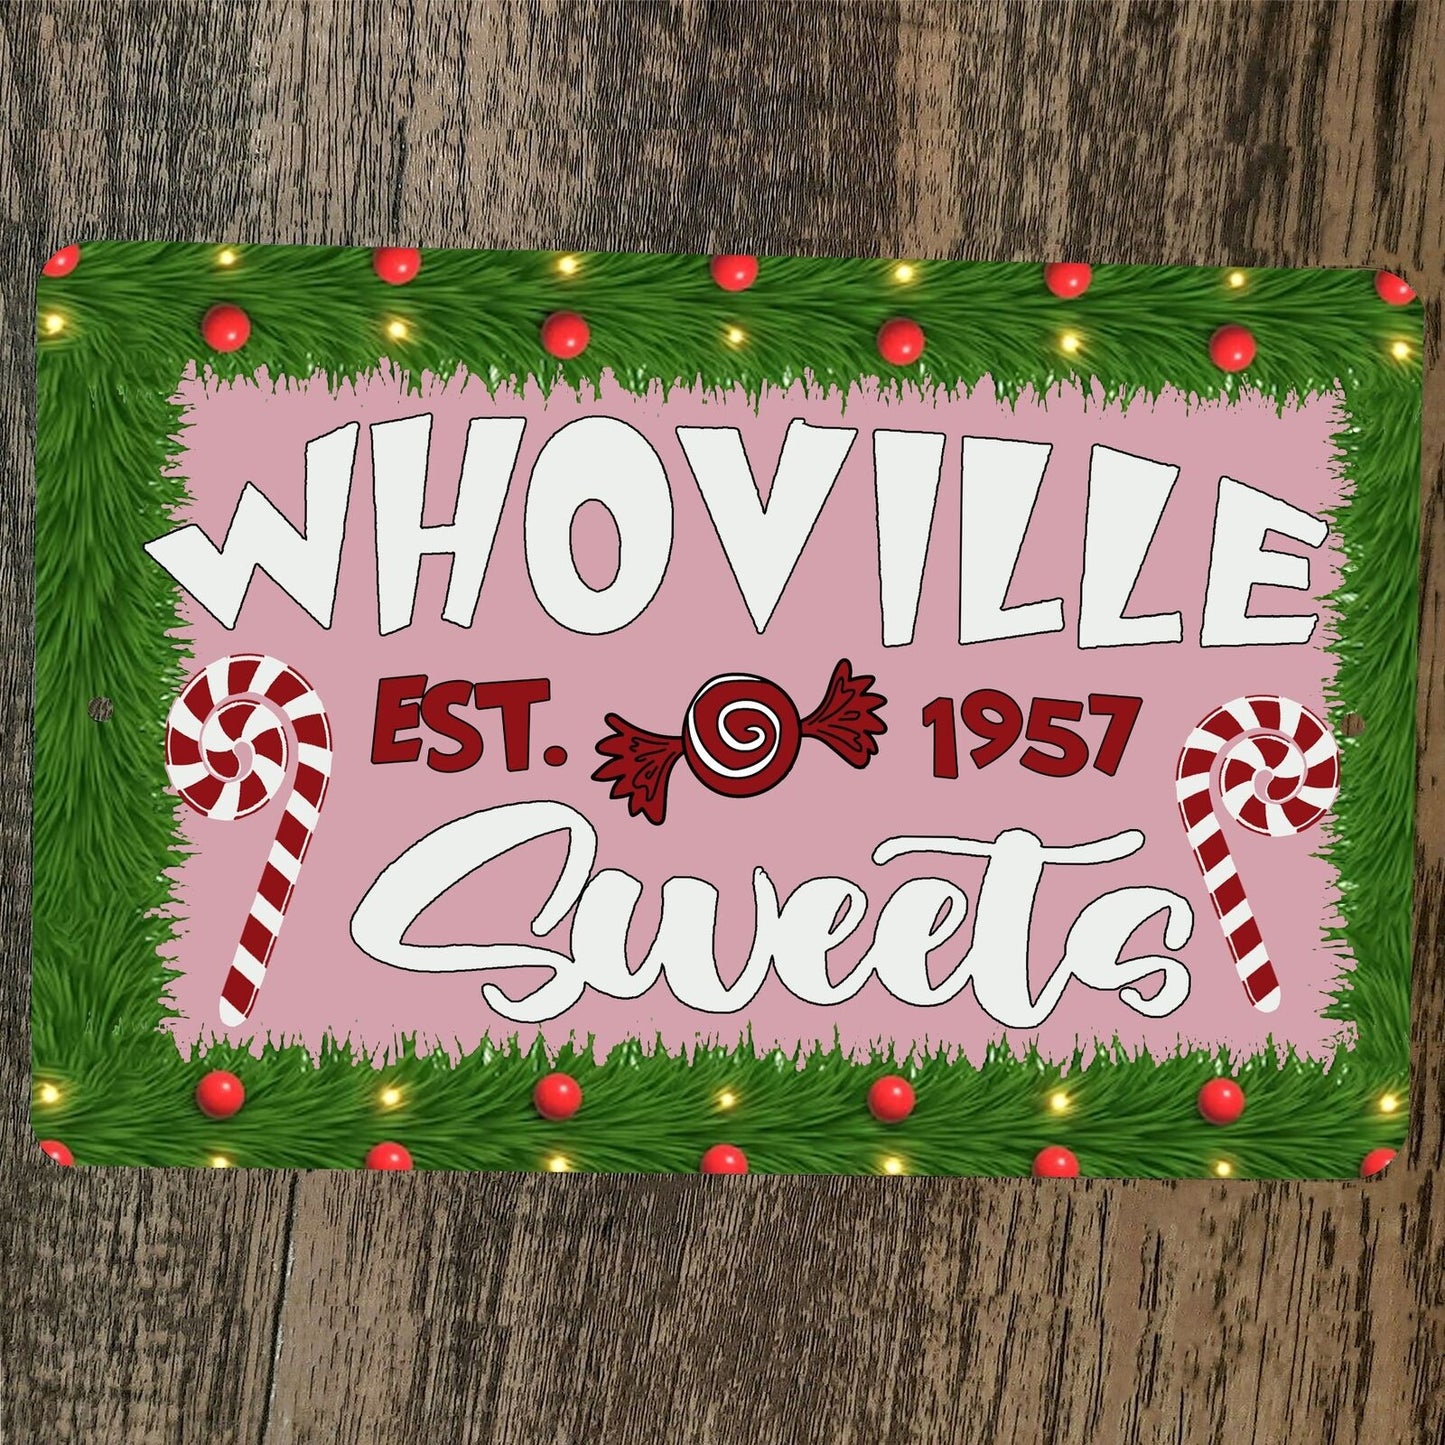 Whoville Sweets 1957 Xmas Christmas 8x12 Metal Wall Sign